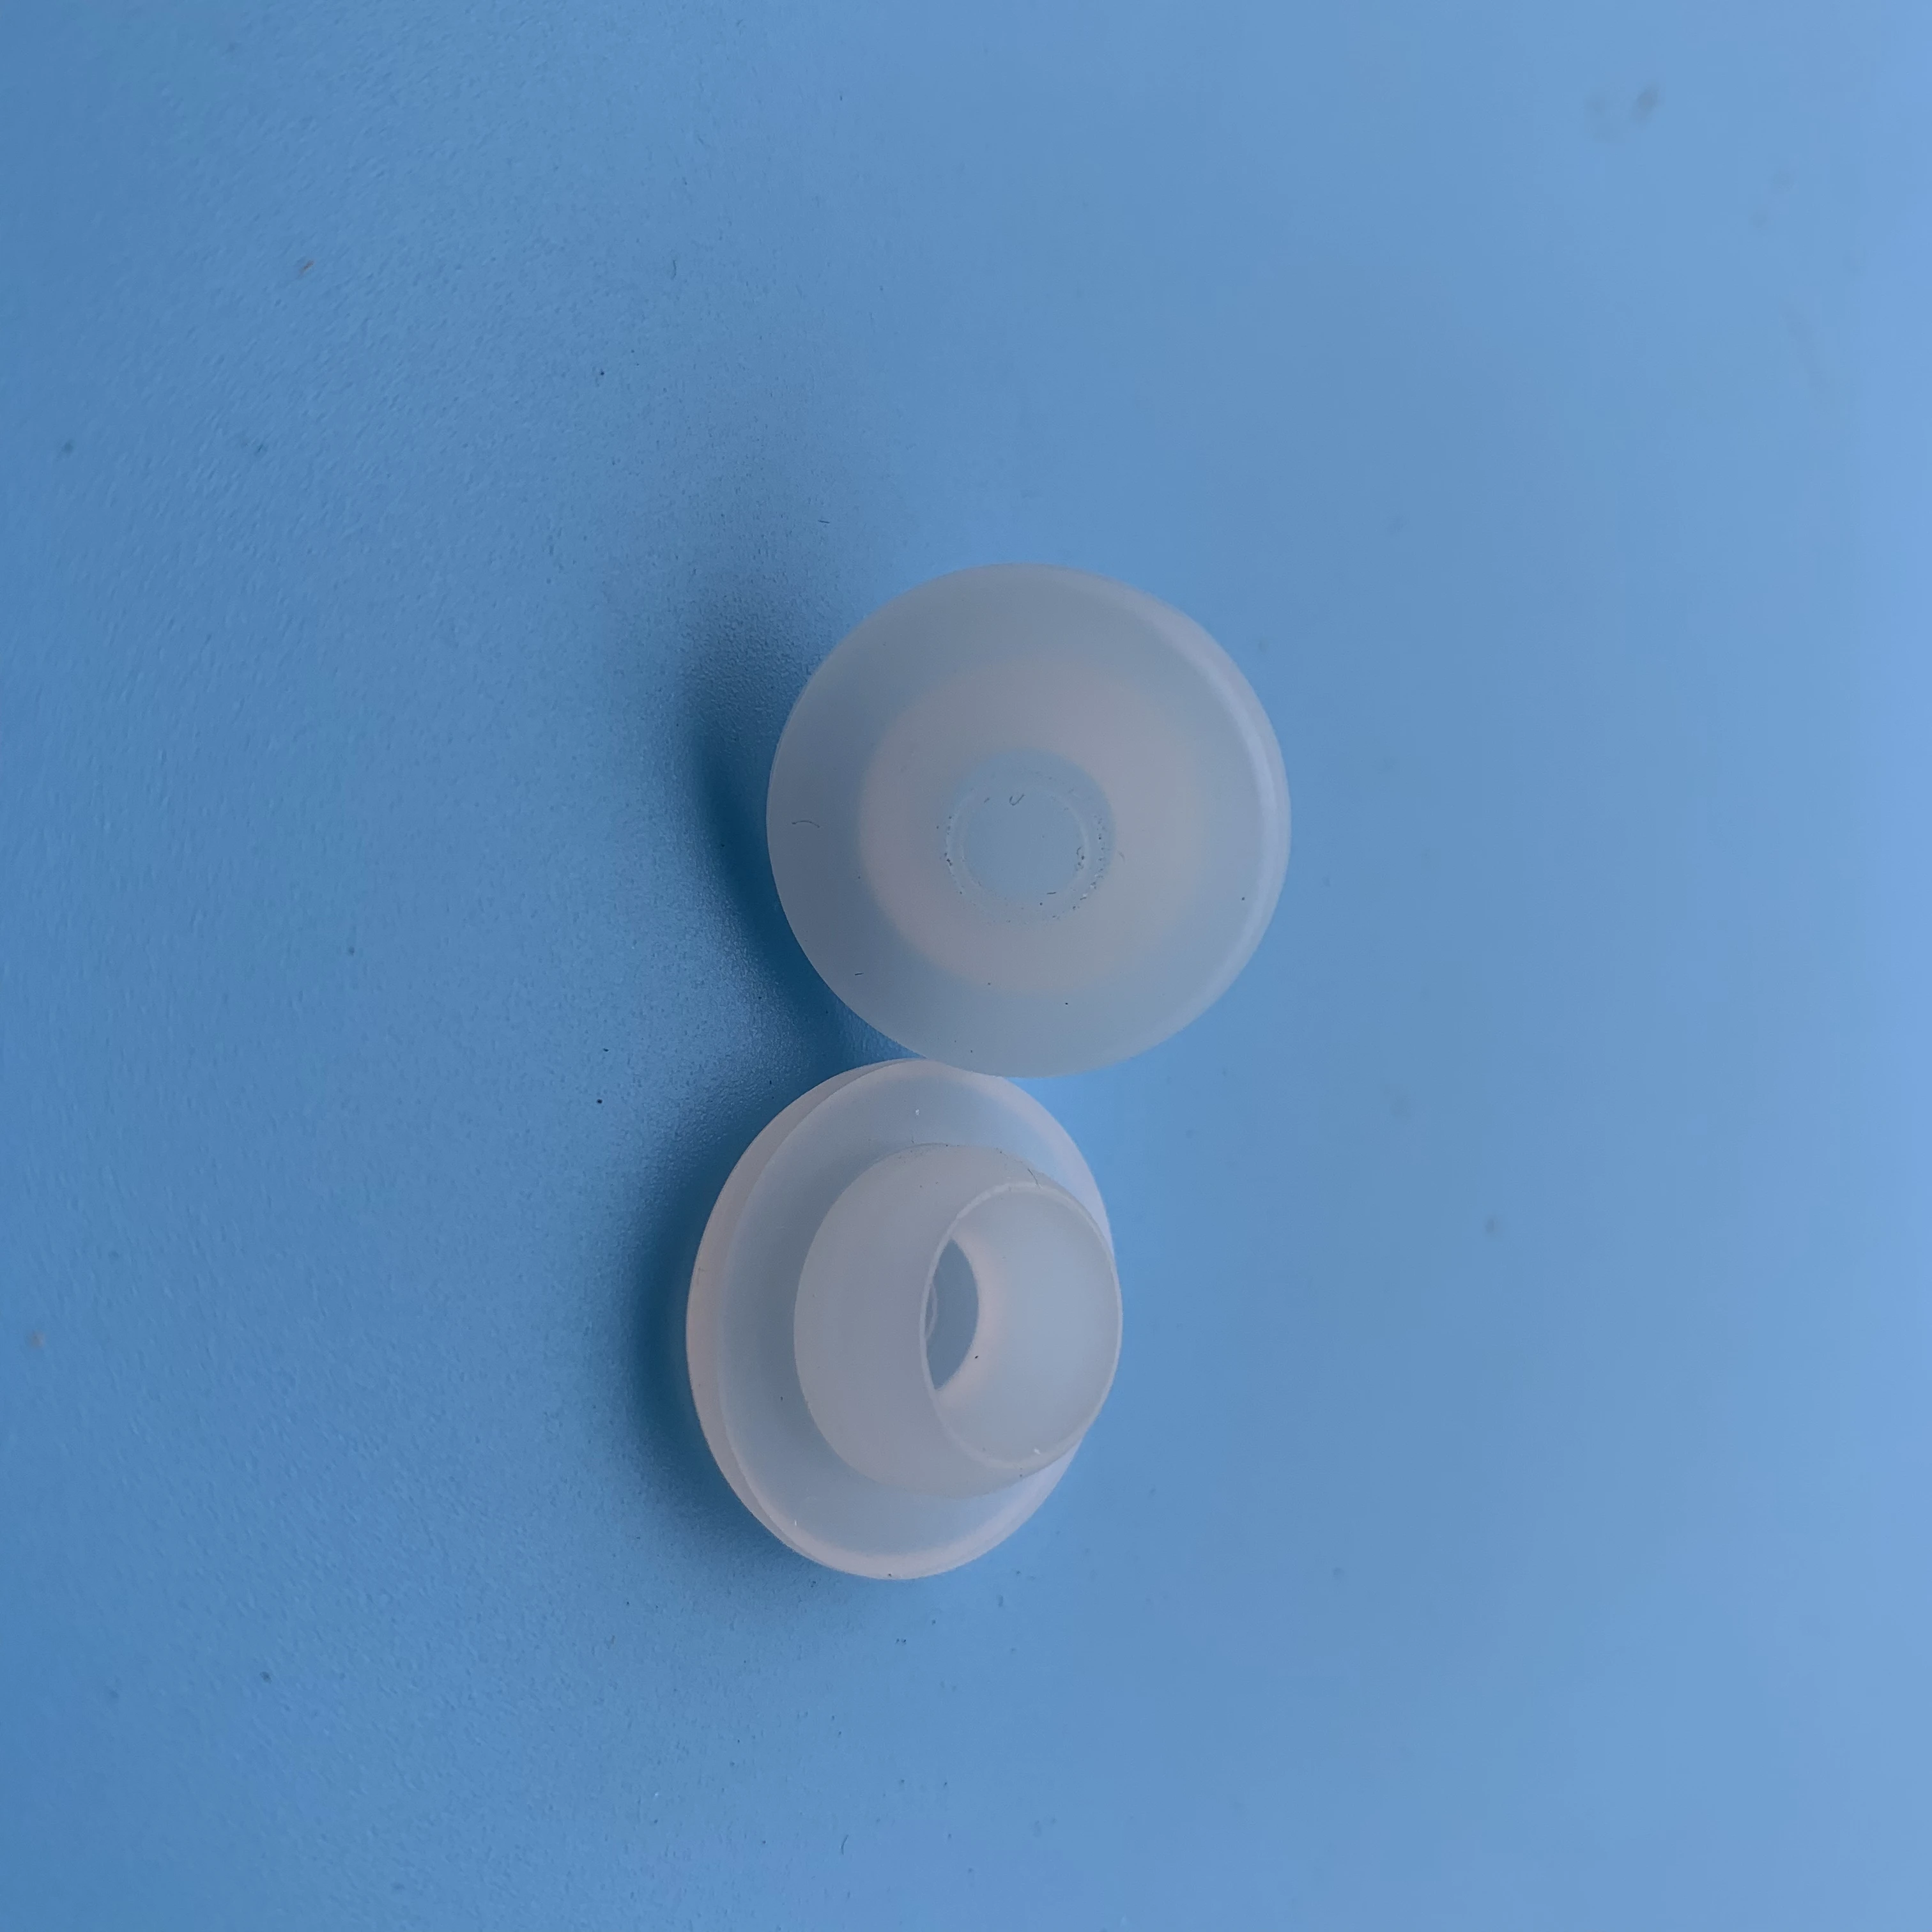 20mm Clear Silicon Rubber Stopper For Injection Tubular Vials - Buy ...